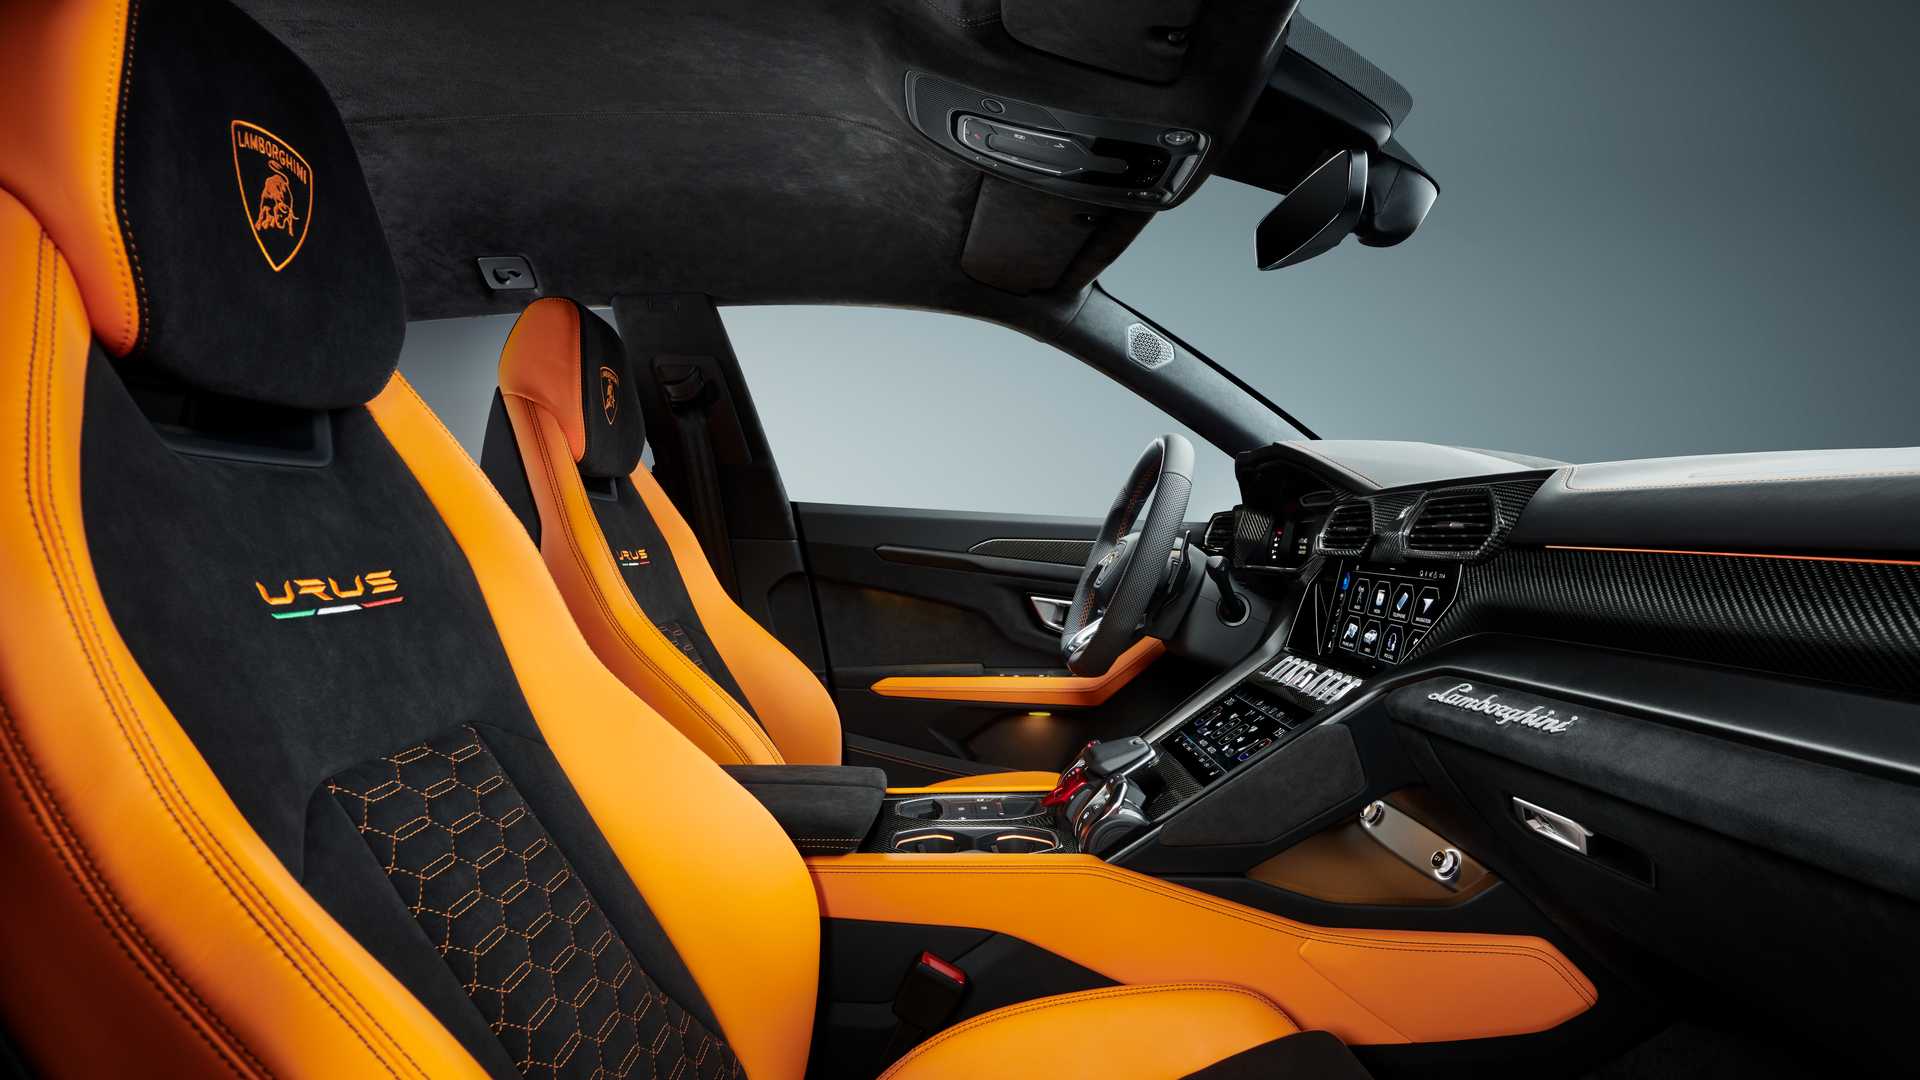 Lamborghini presents the Urus Pearl Capsule which is SUV with complete new design and provides customers the option to choose their color before purchasing.